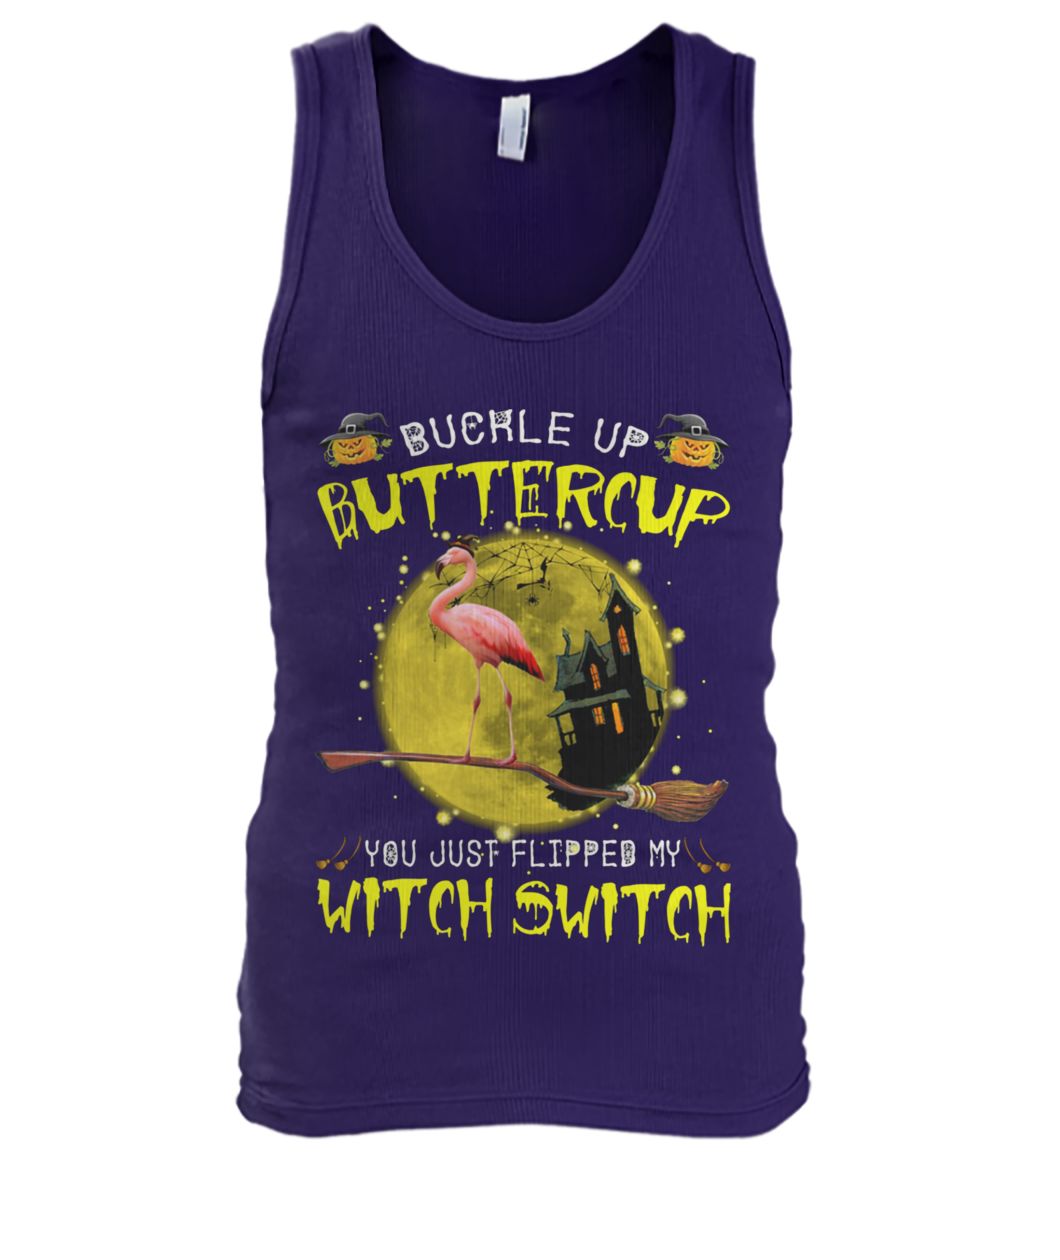 Buckle up buttercup you just flipped my witch switch flamingo men's tank top